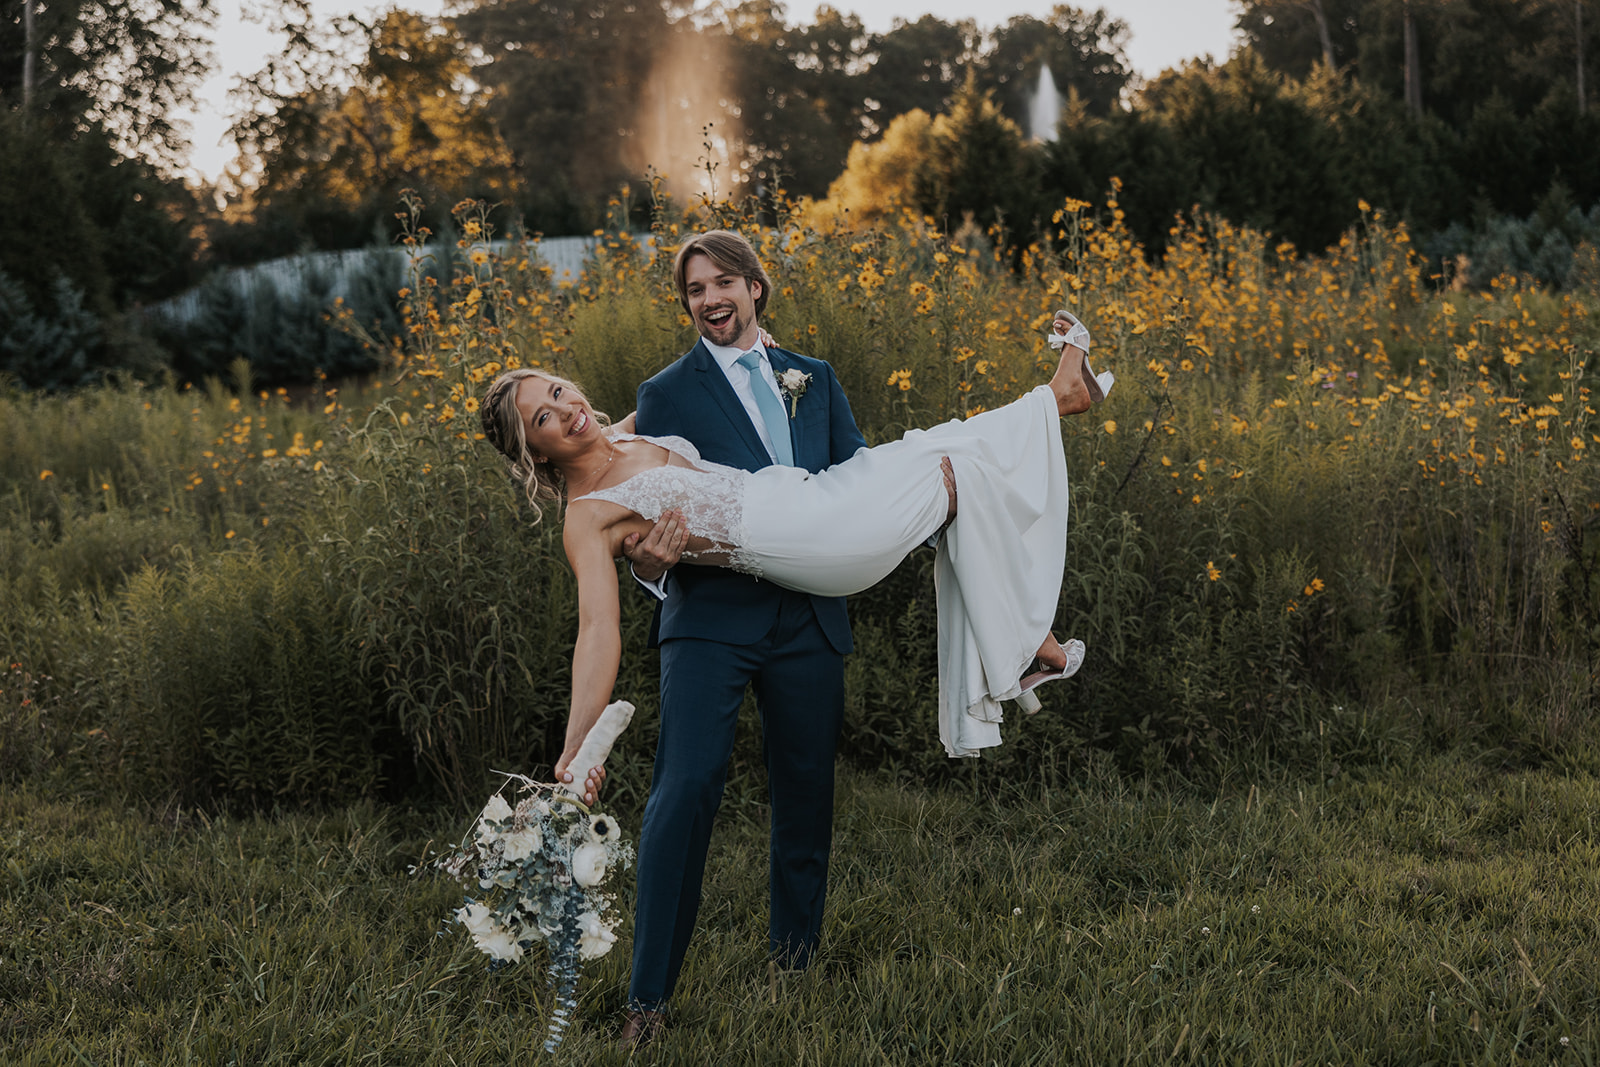 Beautiful bride and groom share a laughs and good times on their Georgia wedding day!